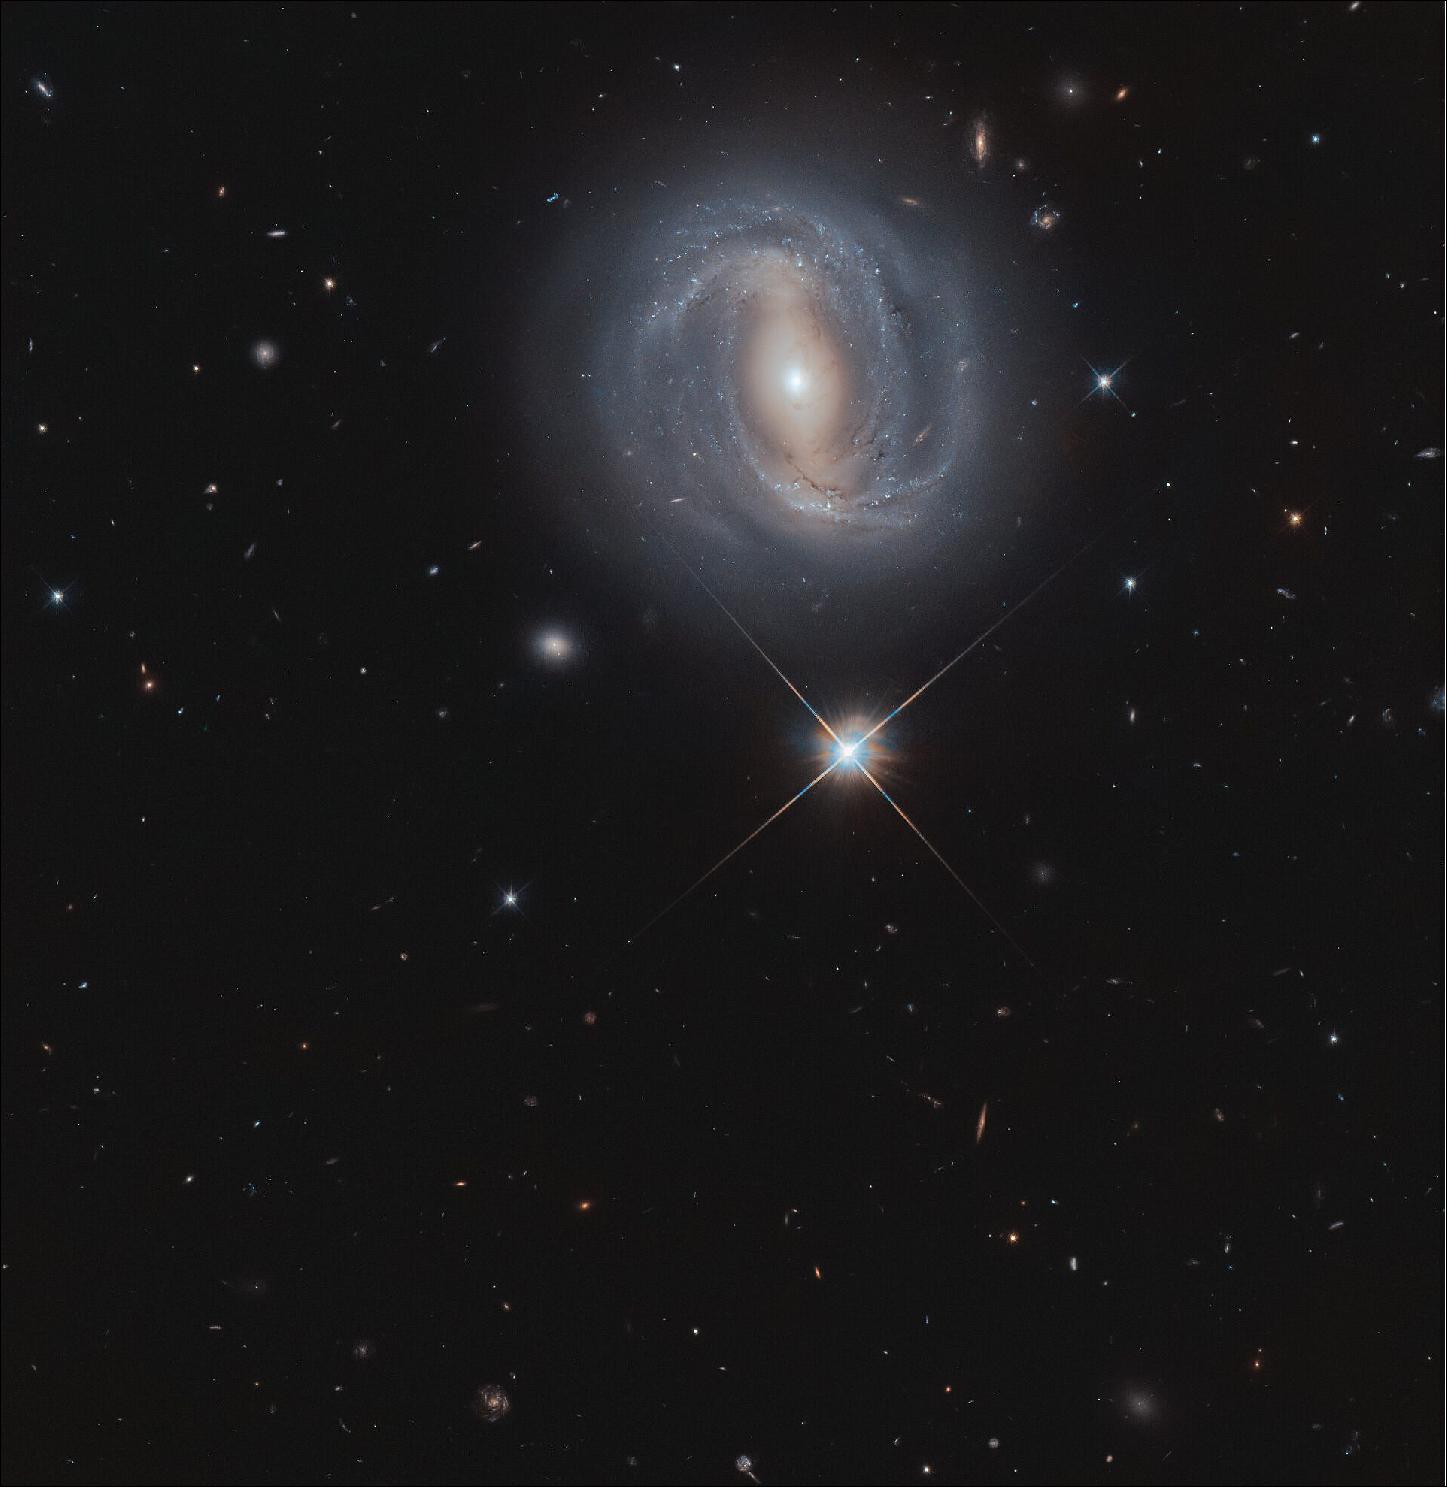 Figure 41: Shining brightly below the galaxy is a star that is actually within our own Milky Way galaxy. This star appears much brighter than the many millions of stars in NGC 4907 as it is 100,000 times closer, residing only 2500 light-years away (image credit: ESA/Hubble & NASA, M. Gregg; CC BY 4.0)